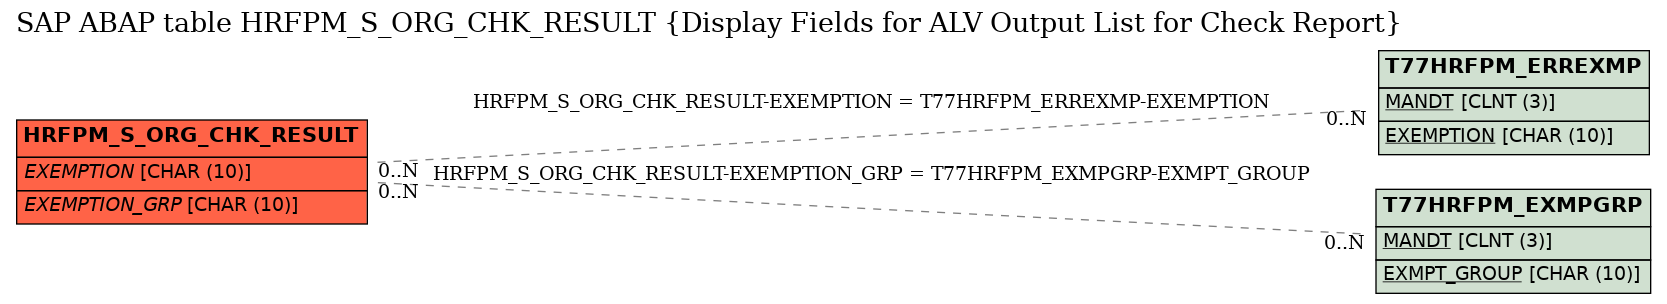 E-R Diagram for table HRFPM_S_ORG_CHK_RESULT (Display Fields for ALV Output List for Check Report)